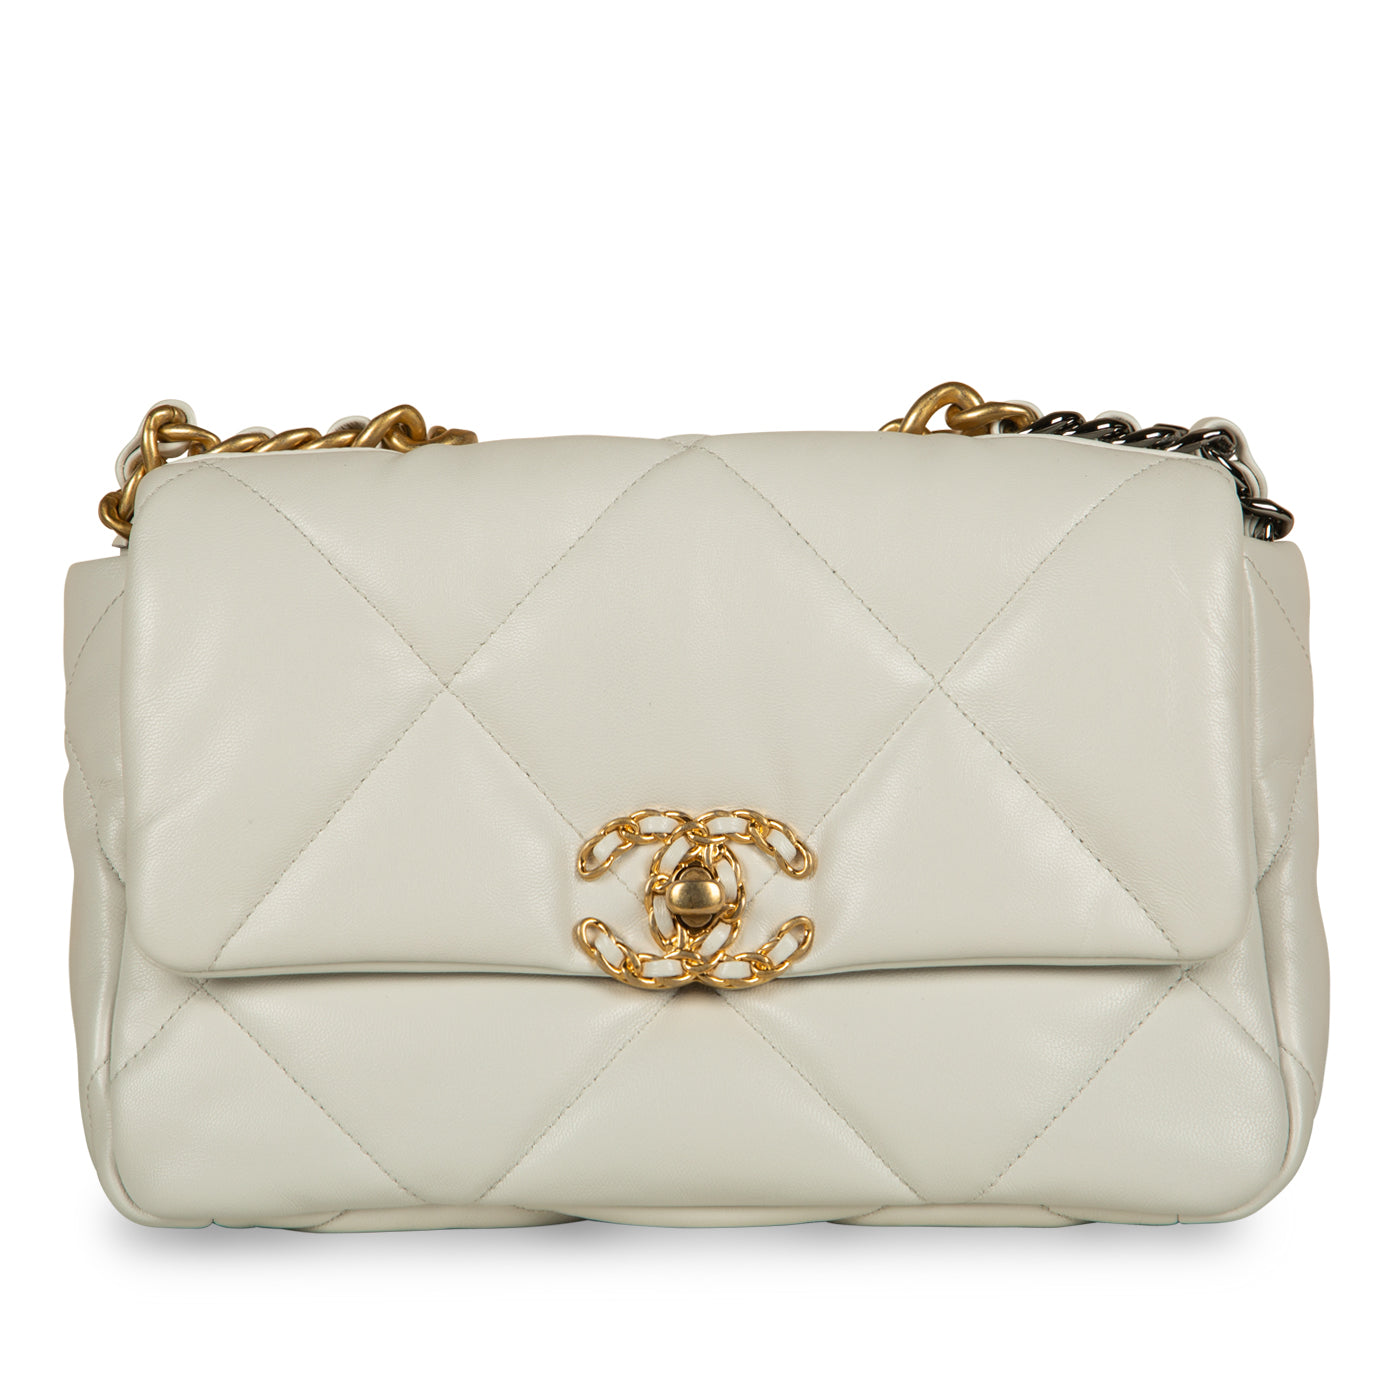 CHANEL Lambskin Quilted Medium Chanel 19 Flap White 1194806  FASHIONPHILE